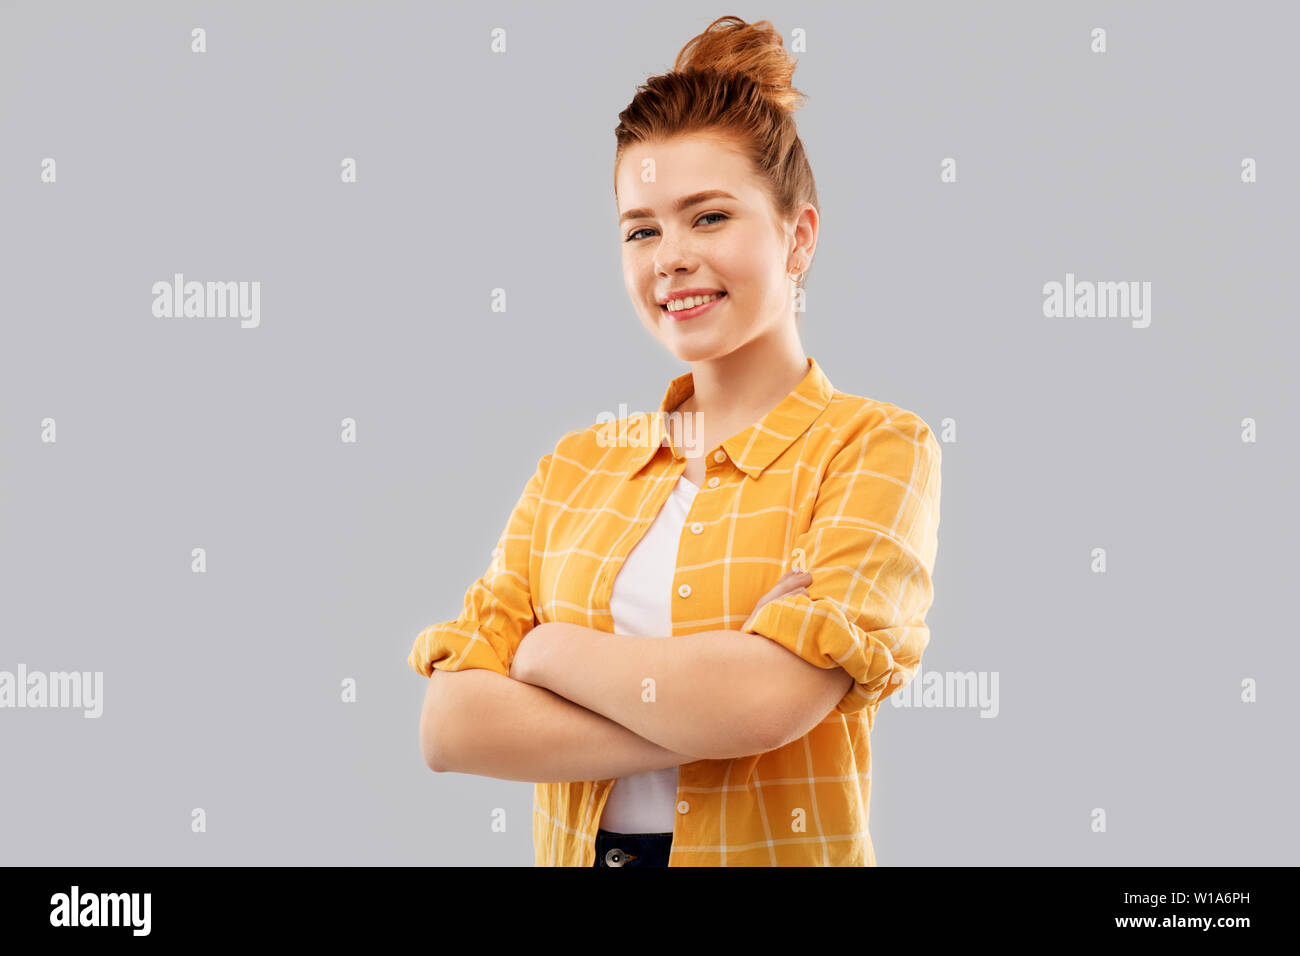 smiling red haired teenage girl with crossed arms Stock Photo